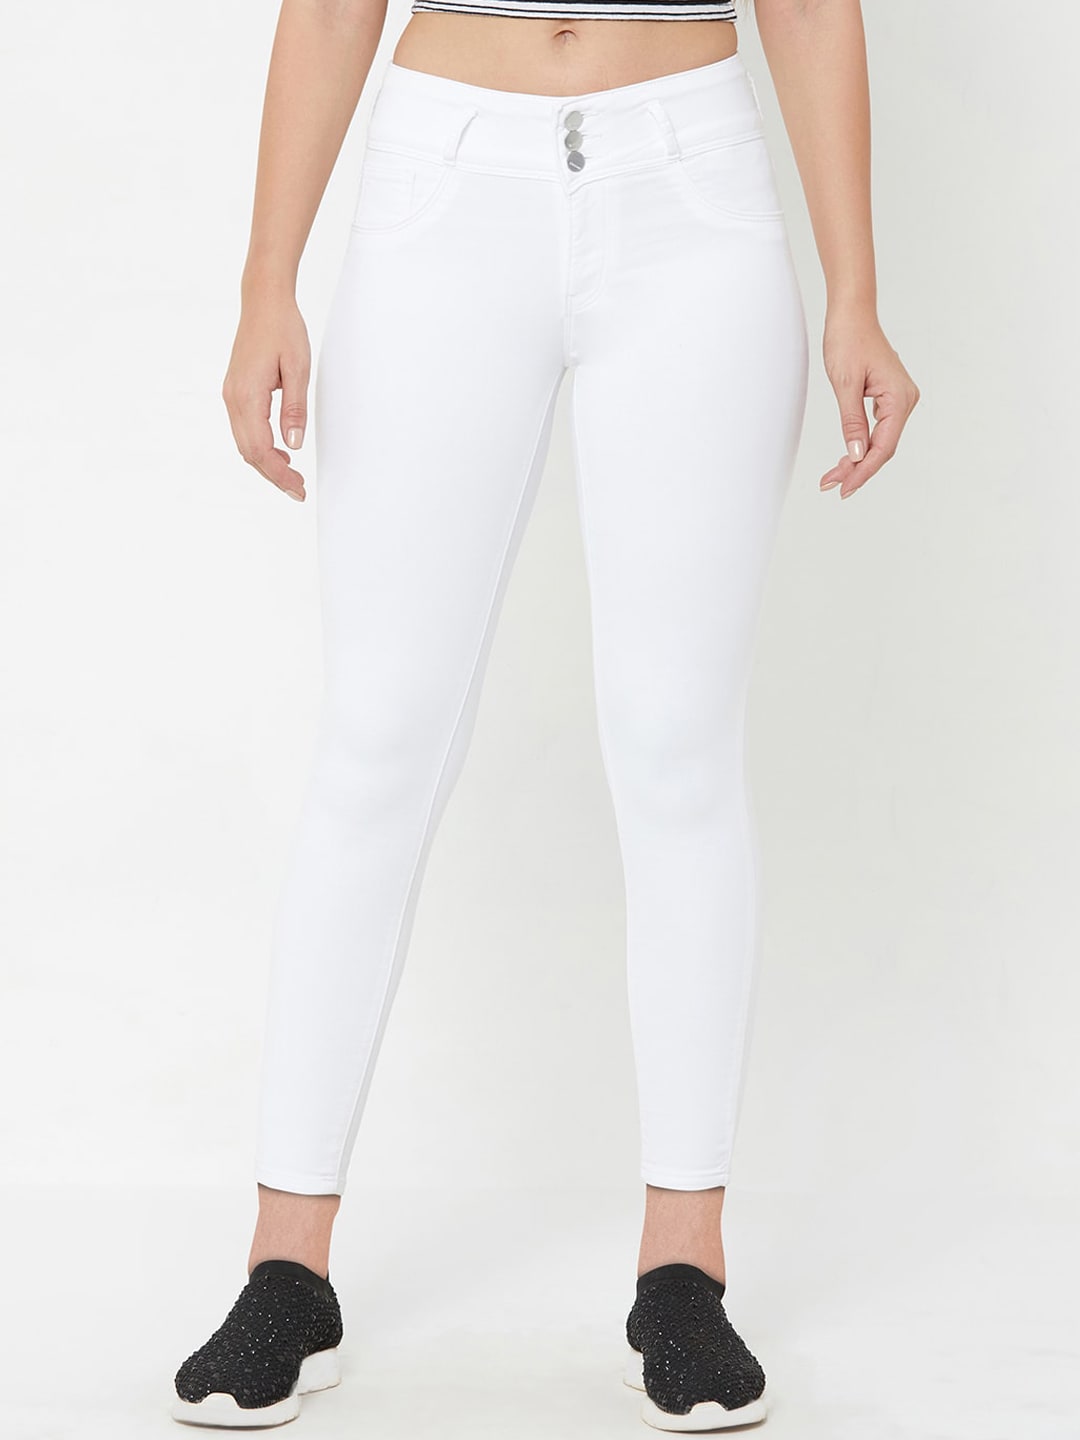 Kraus Jeans Women White Skinny Fit High-Rise Jeans Price in India